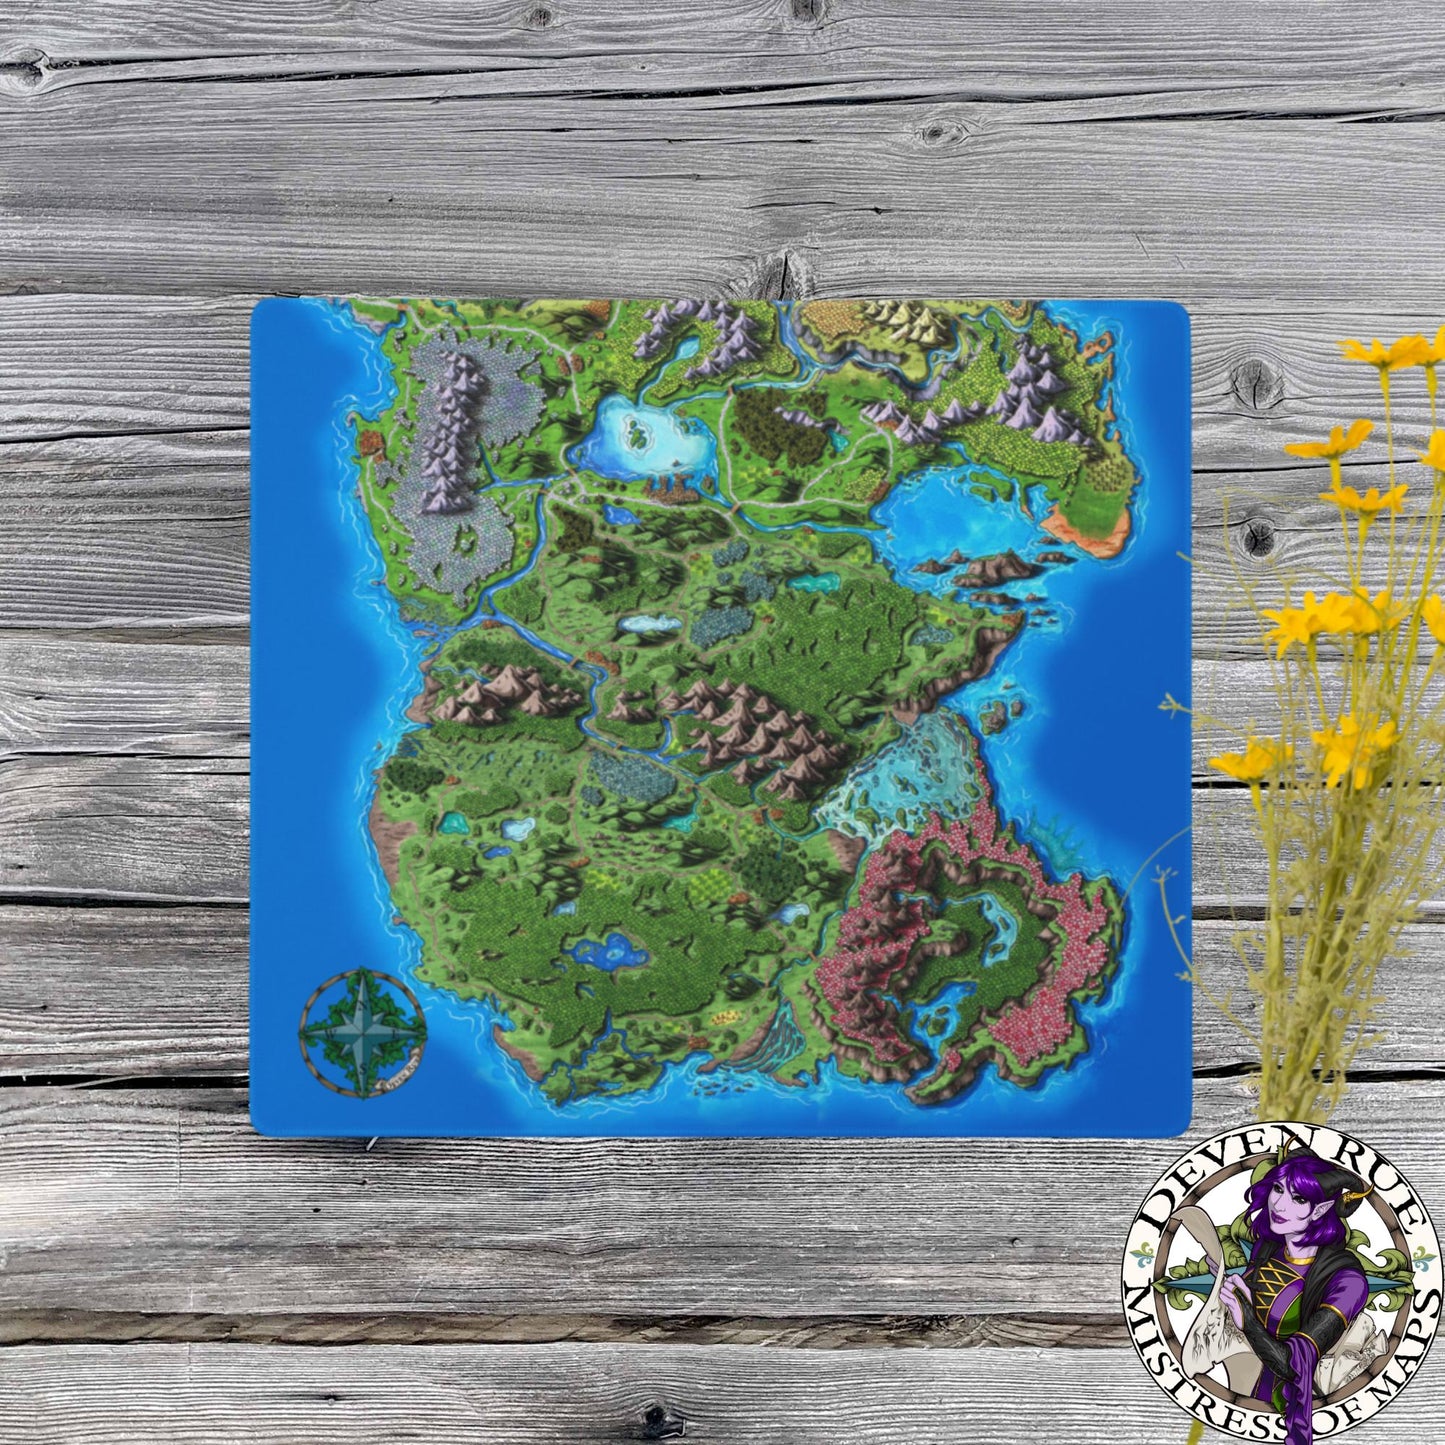 A 18" by 16" mouse pad with the Taur'Syldor map printed on it with a bunch of flowers to the side.